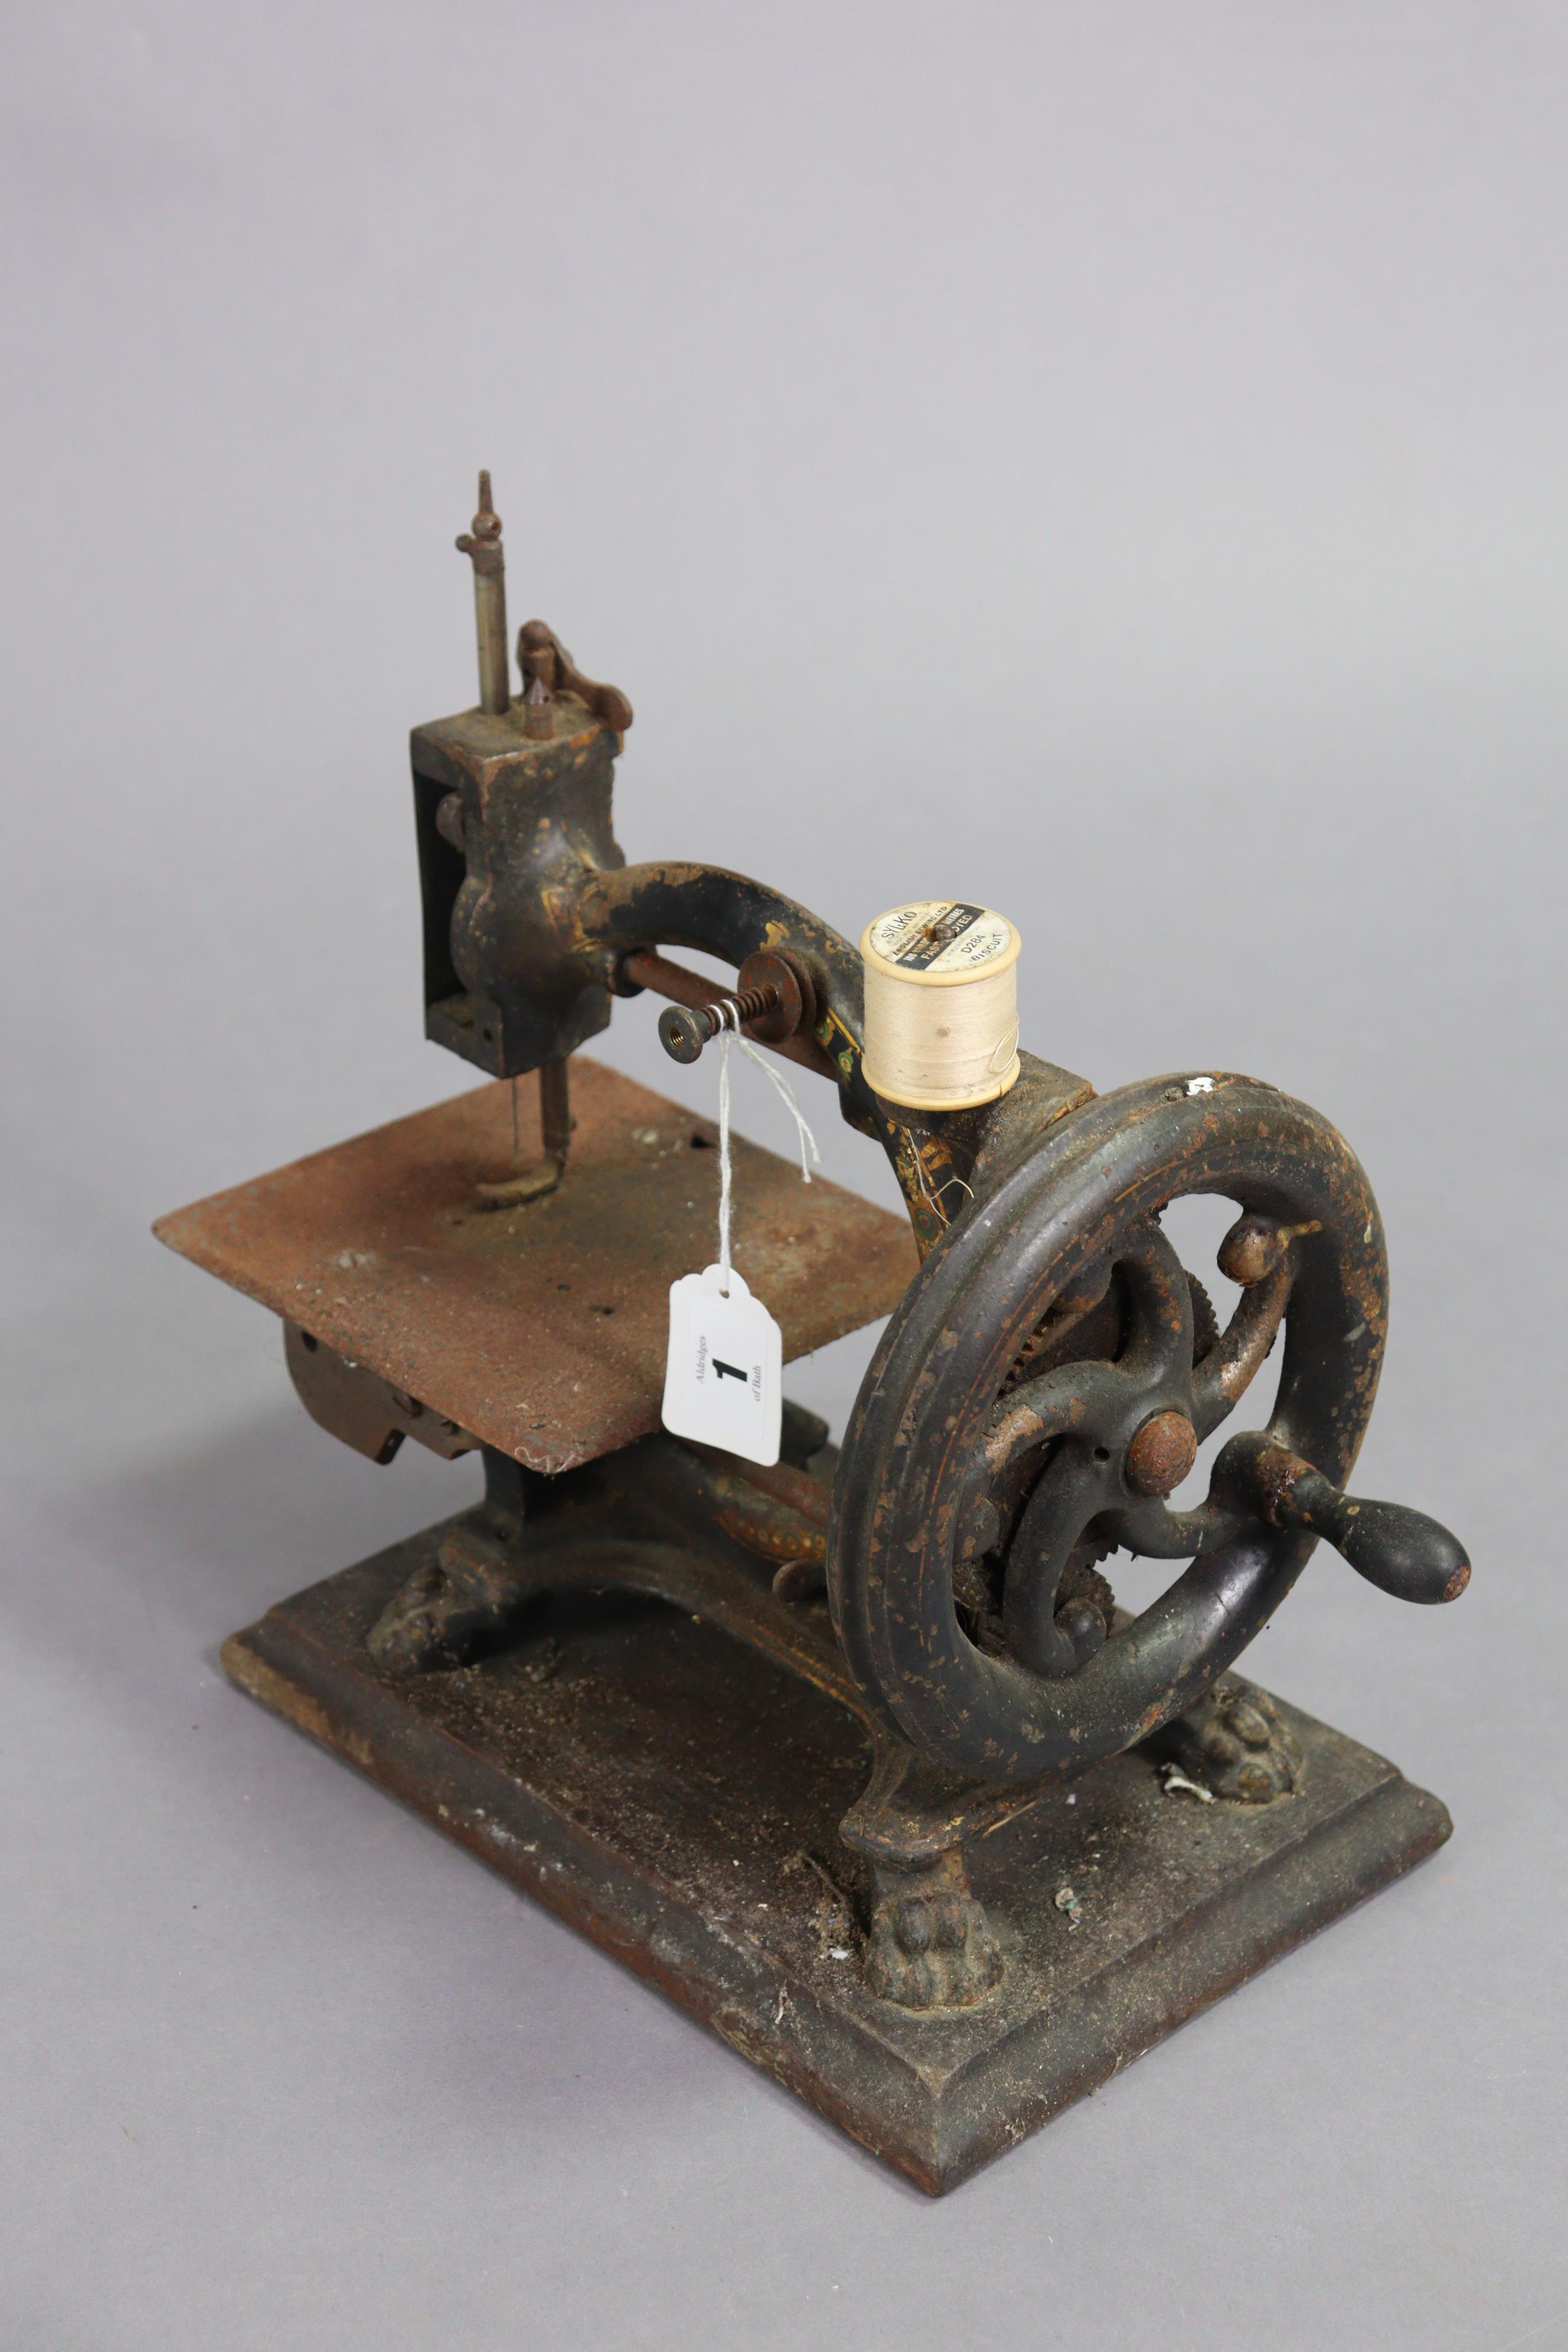 A late 19th century “Monarch” sewing machine by Smith & Co. of London, 28.5cm long, uncased. - Image 4 of 5